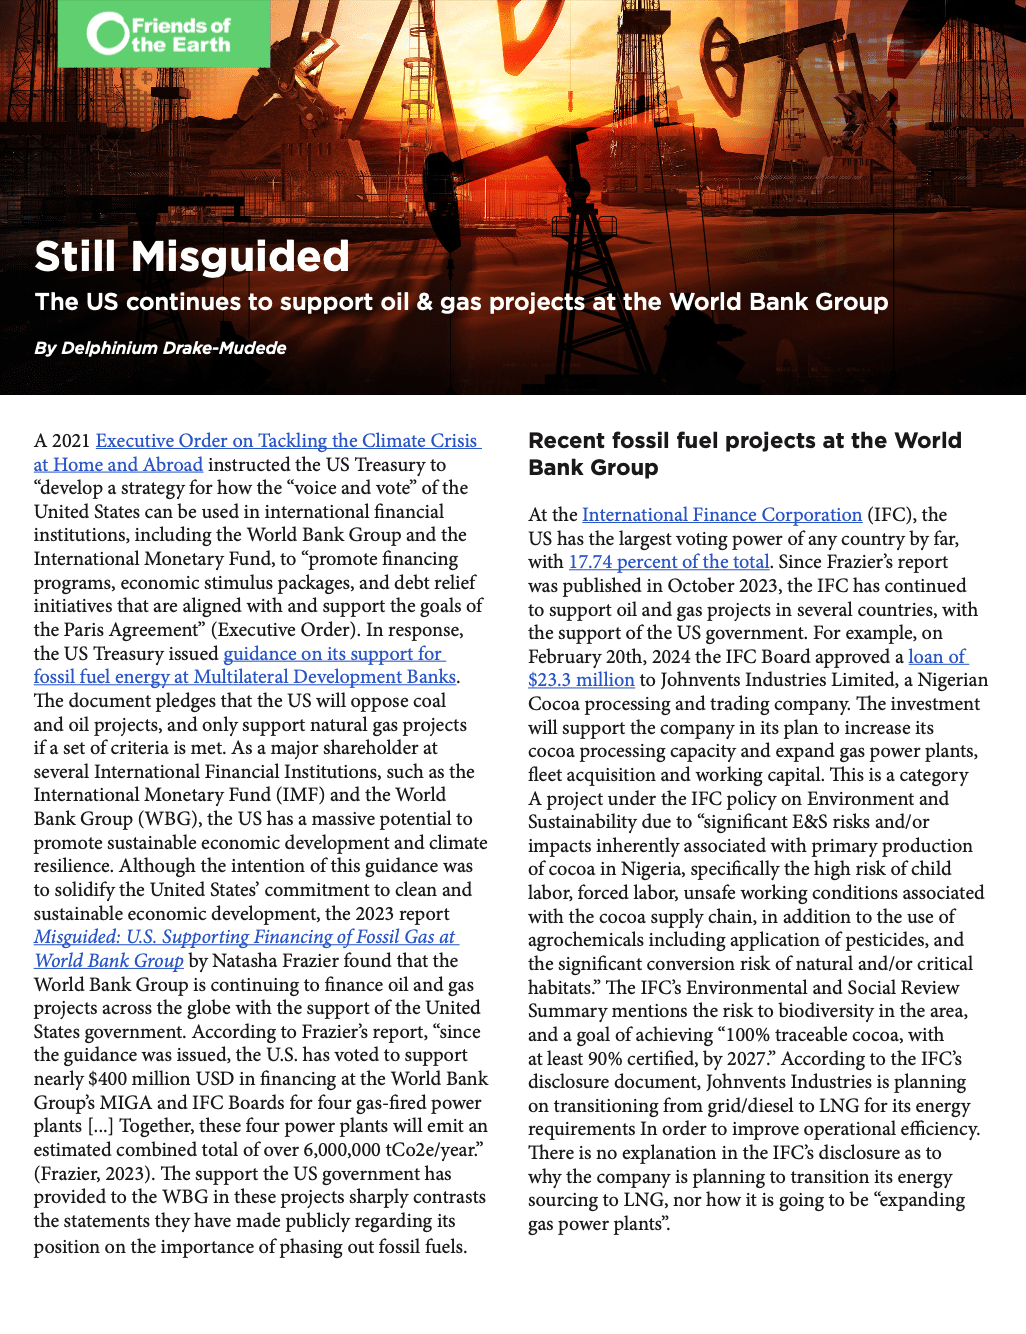 Still Misguided: The US continues to support oil & gas projects at the World Bank Group